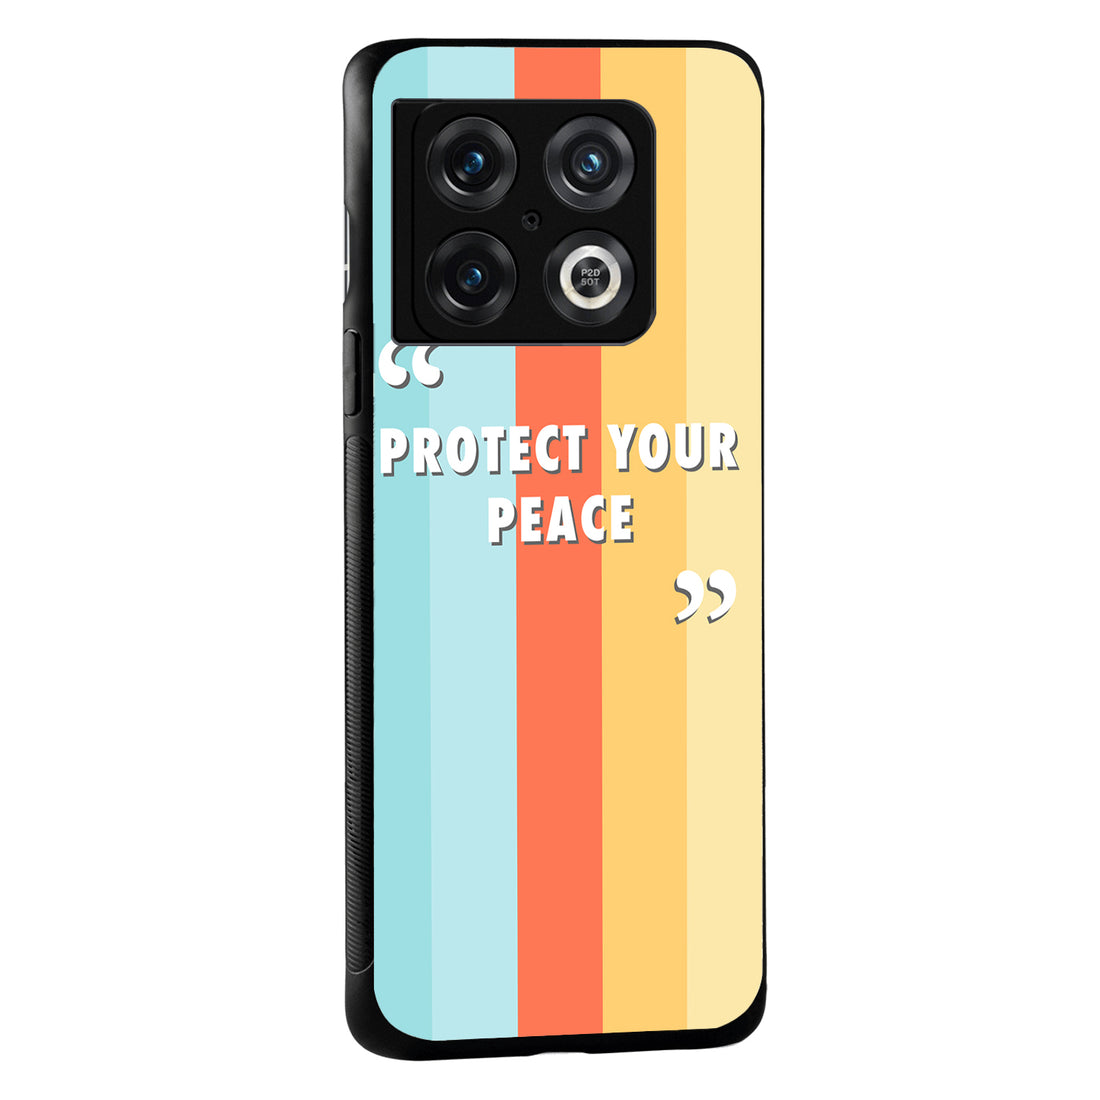 Protect your peace Motivational Quotes Oneplus 10 Pro Back Case